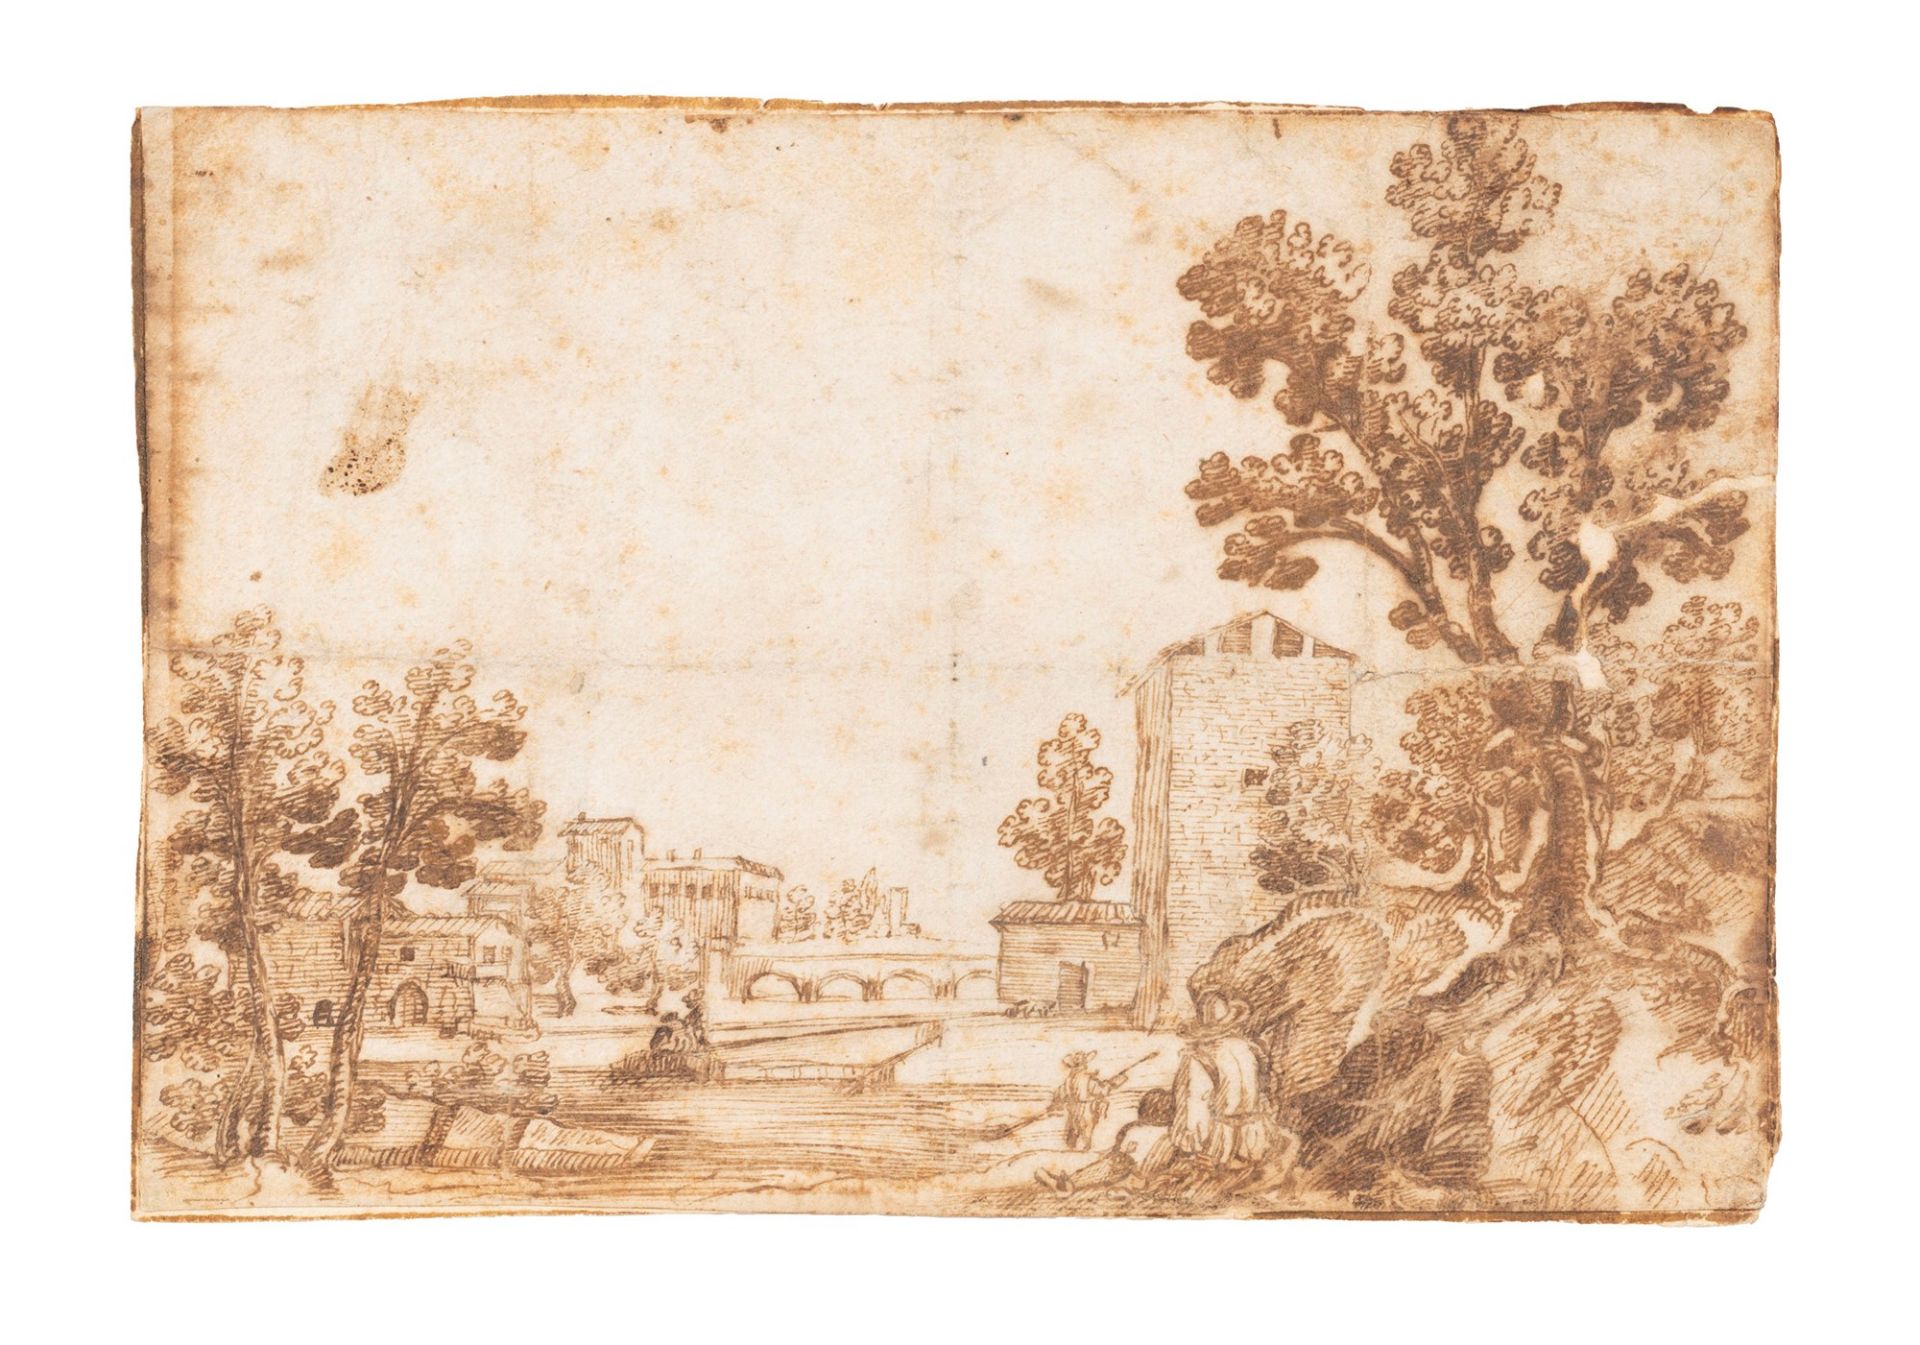 Tuscan school, sixteenth century - View of the city with bridge and tower